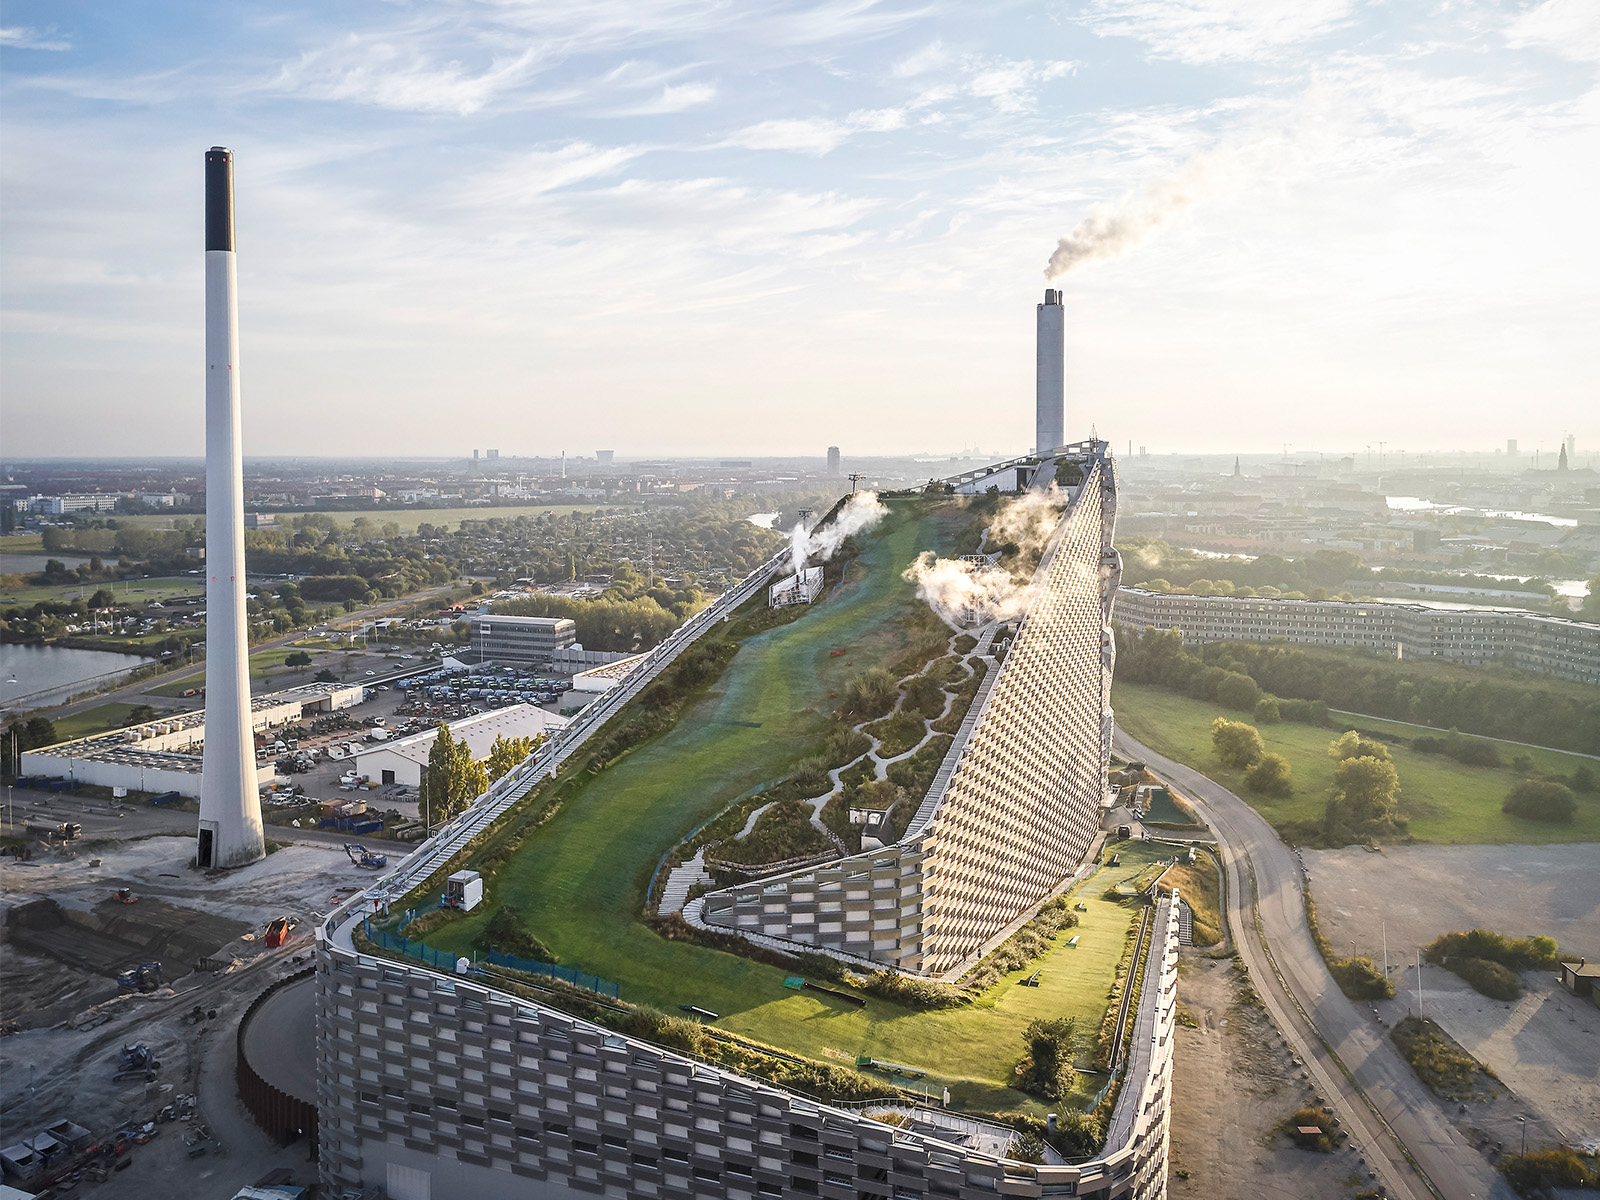 An energy-from-waste plant with an outdoor sports center on its roof, Amager Bakke is an inspiration to WAT, as it is integrated into the urban ecosystem. (Credit photo Copenhill Hufton&Crow / ARC)